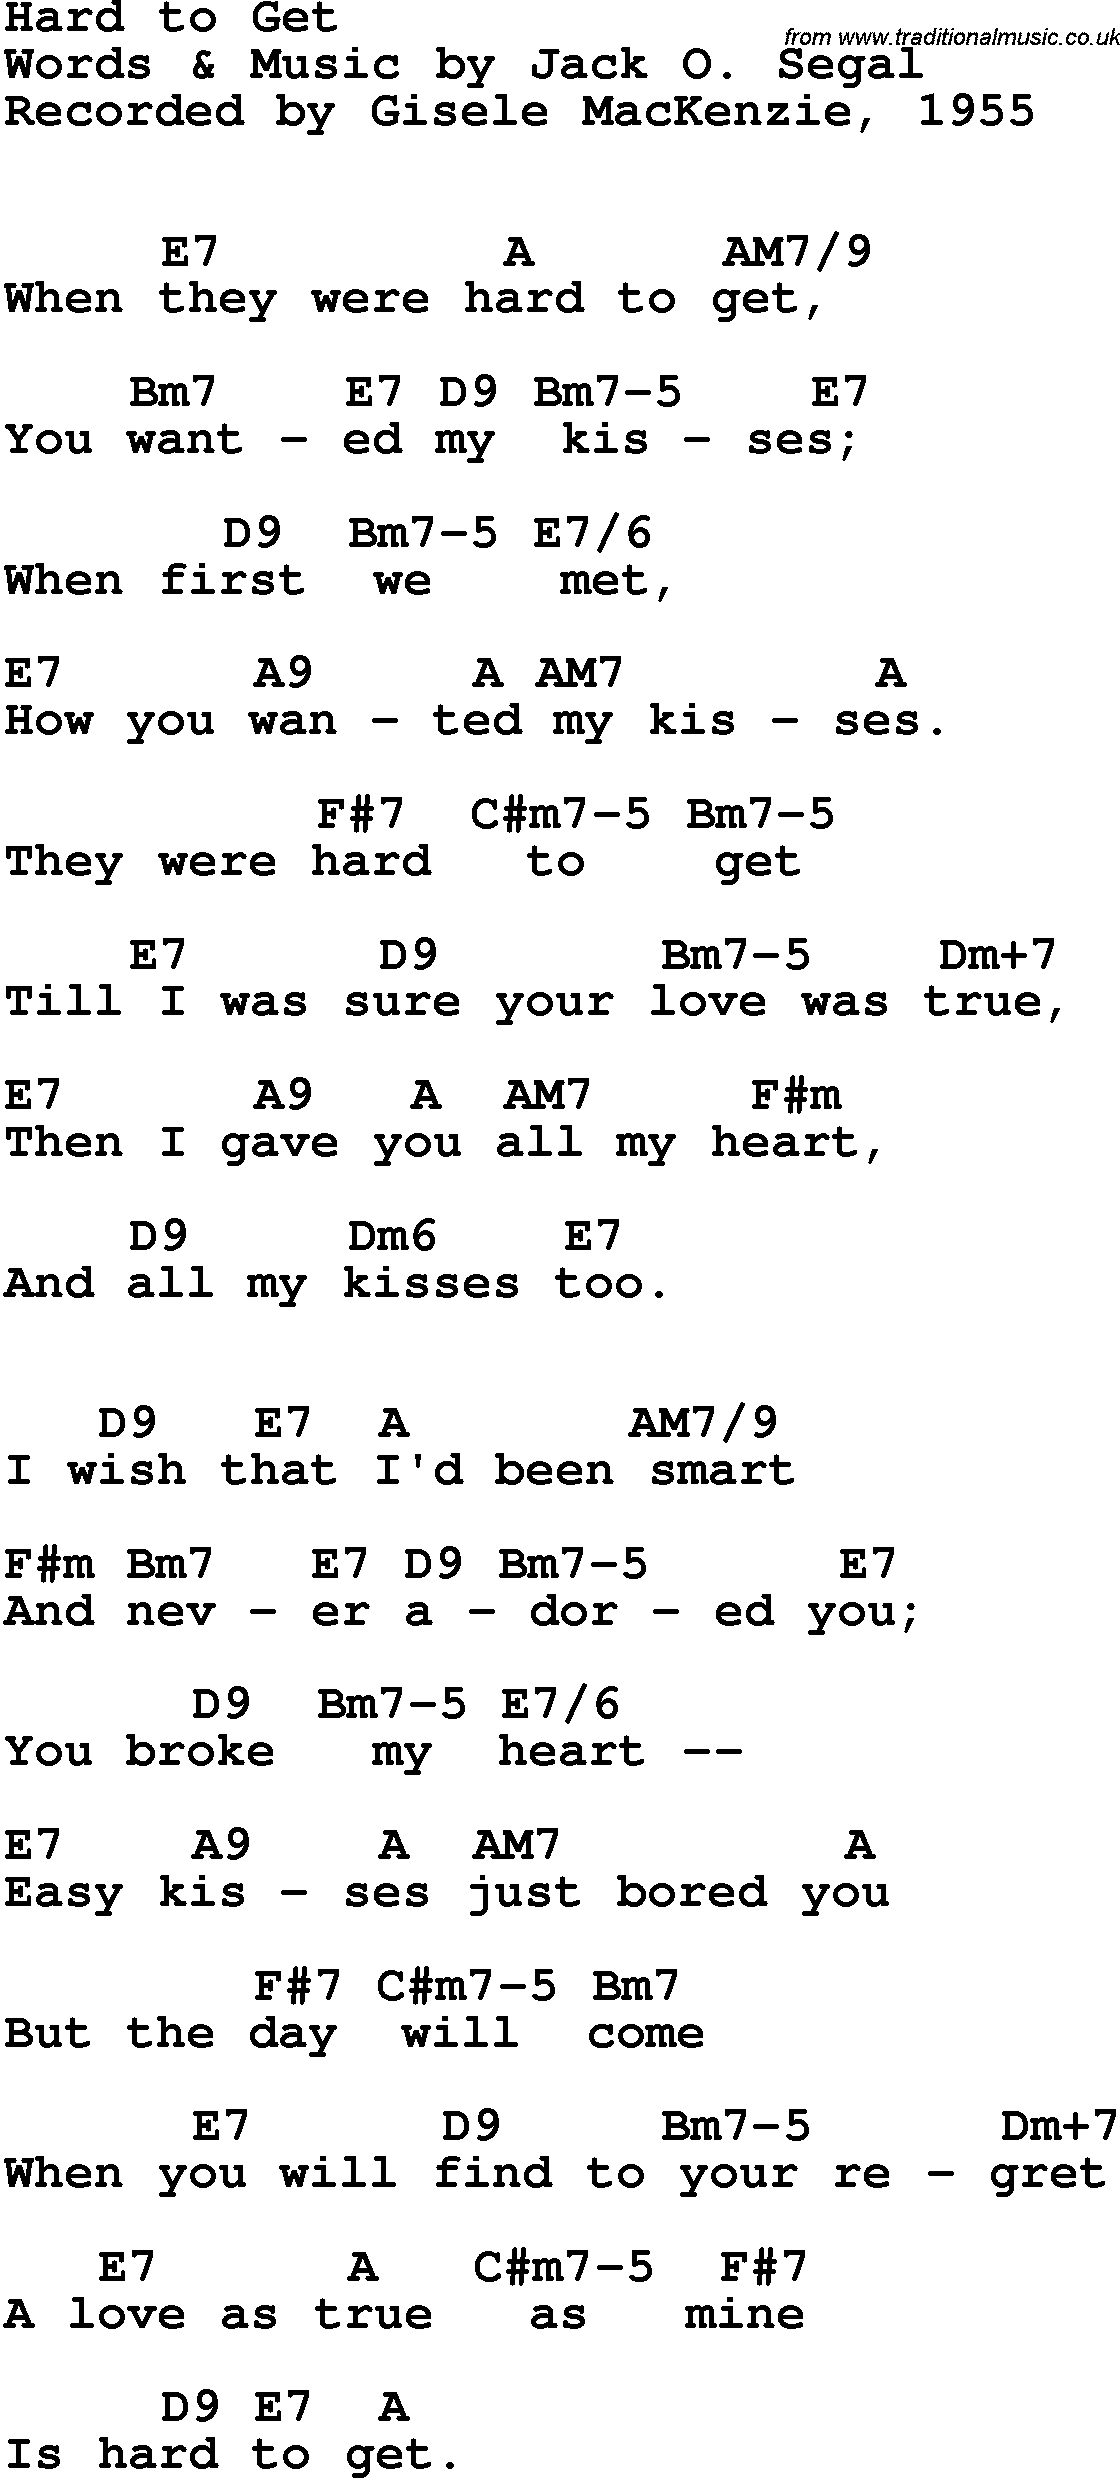 Song Lyrics with guitar chords for Hard To Get - Giselle Mckenzie, 1955